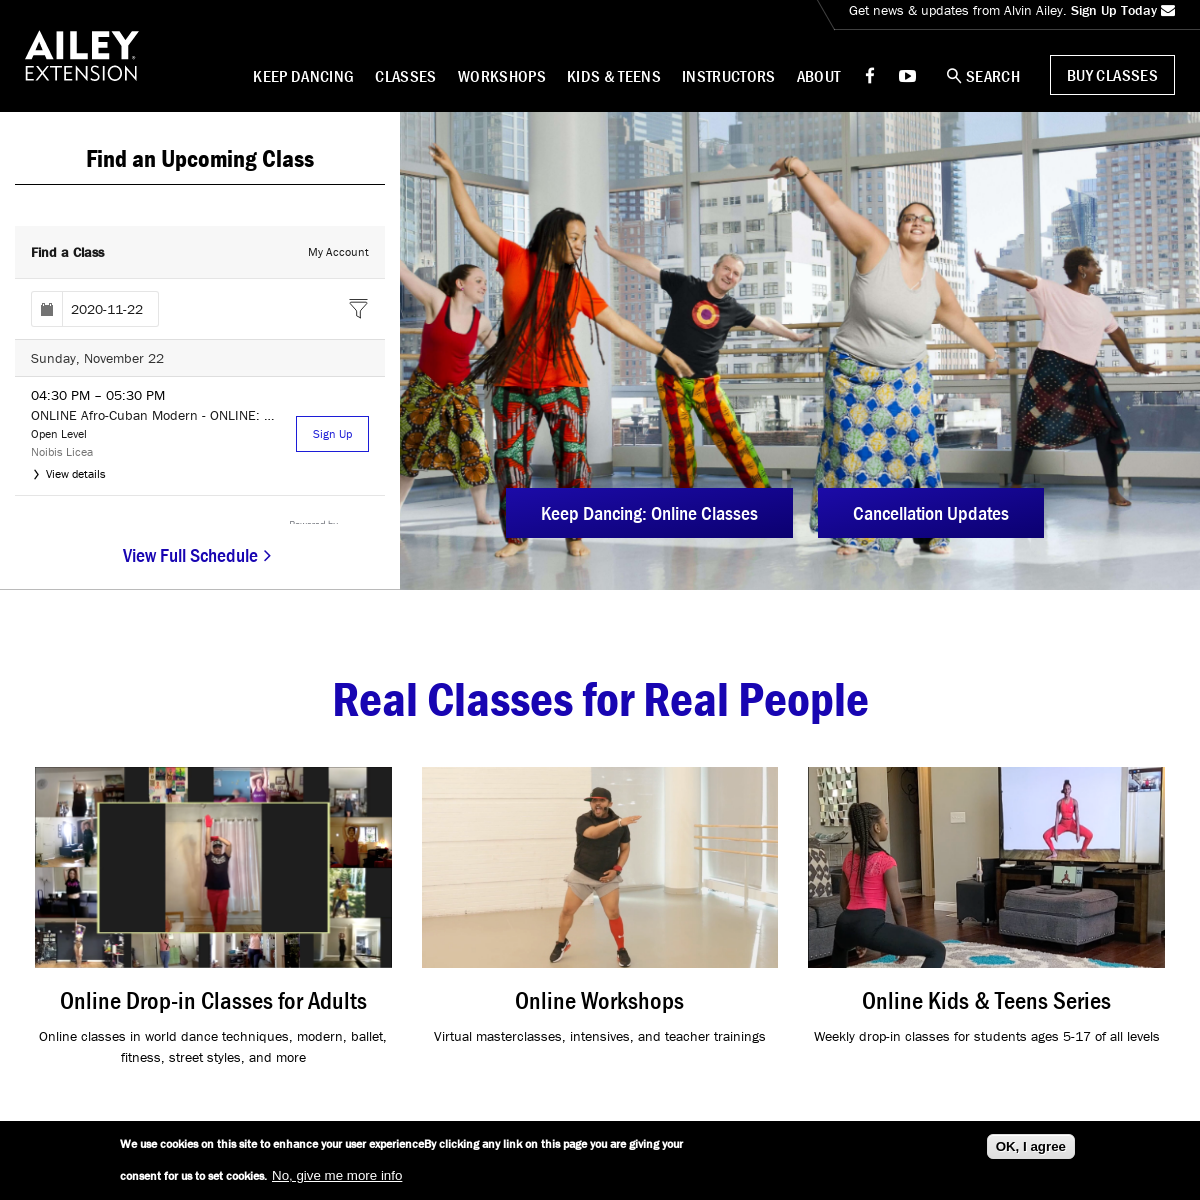 A complete backup of aileyextension.com